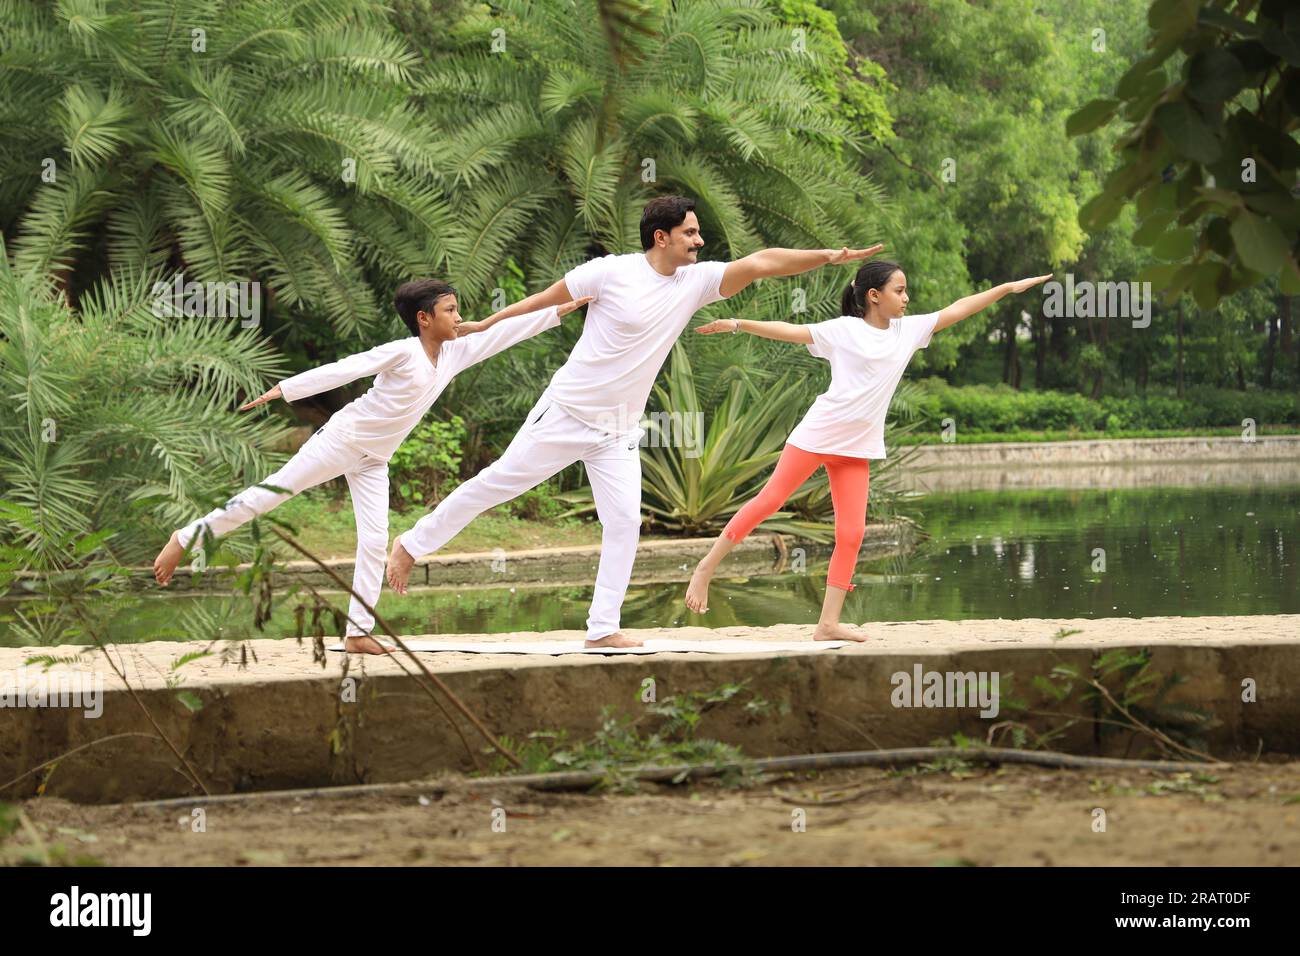 Trainer exercising and teaching kids the yoga poses in green environment early morning in park to maintain healthy lifestyle. International yoga day. Stock Photo